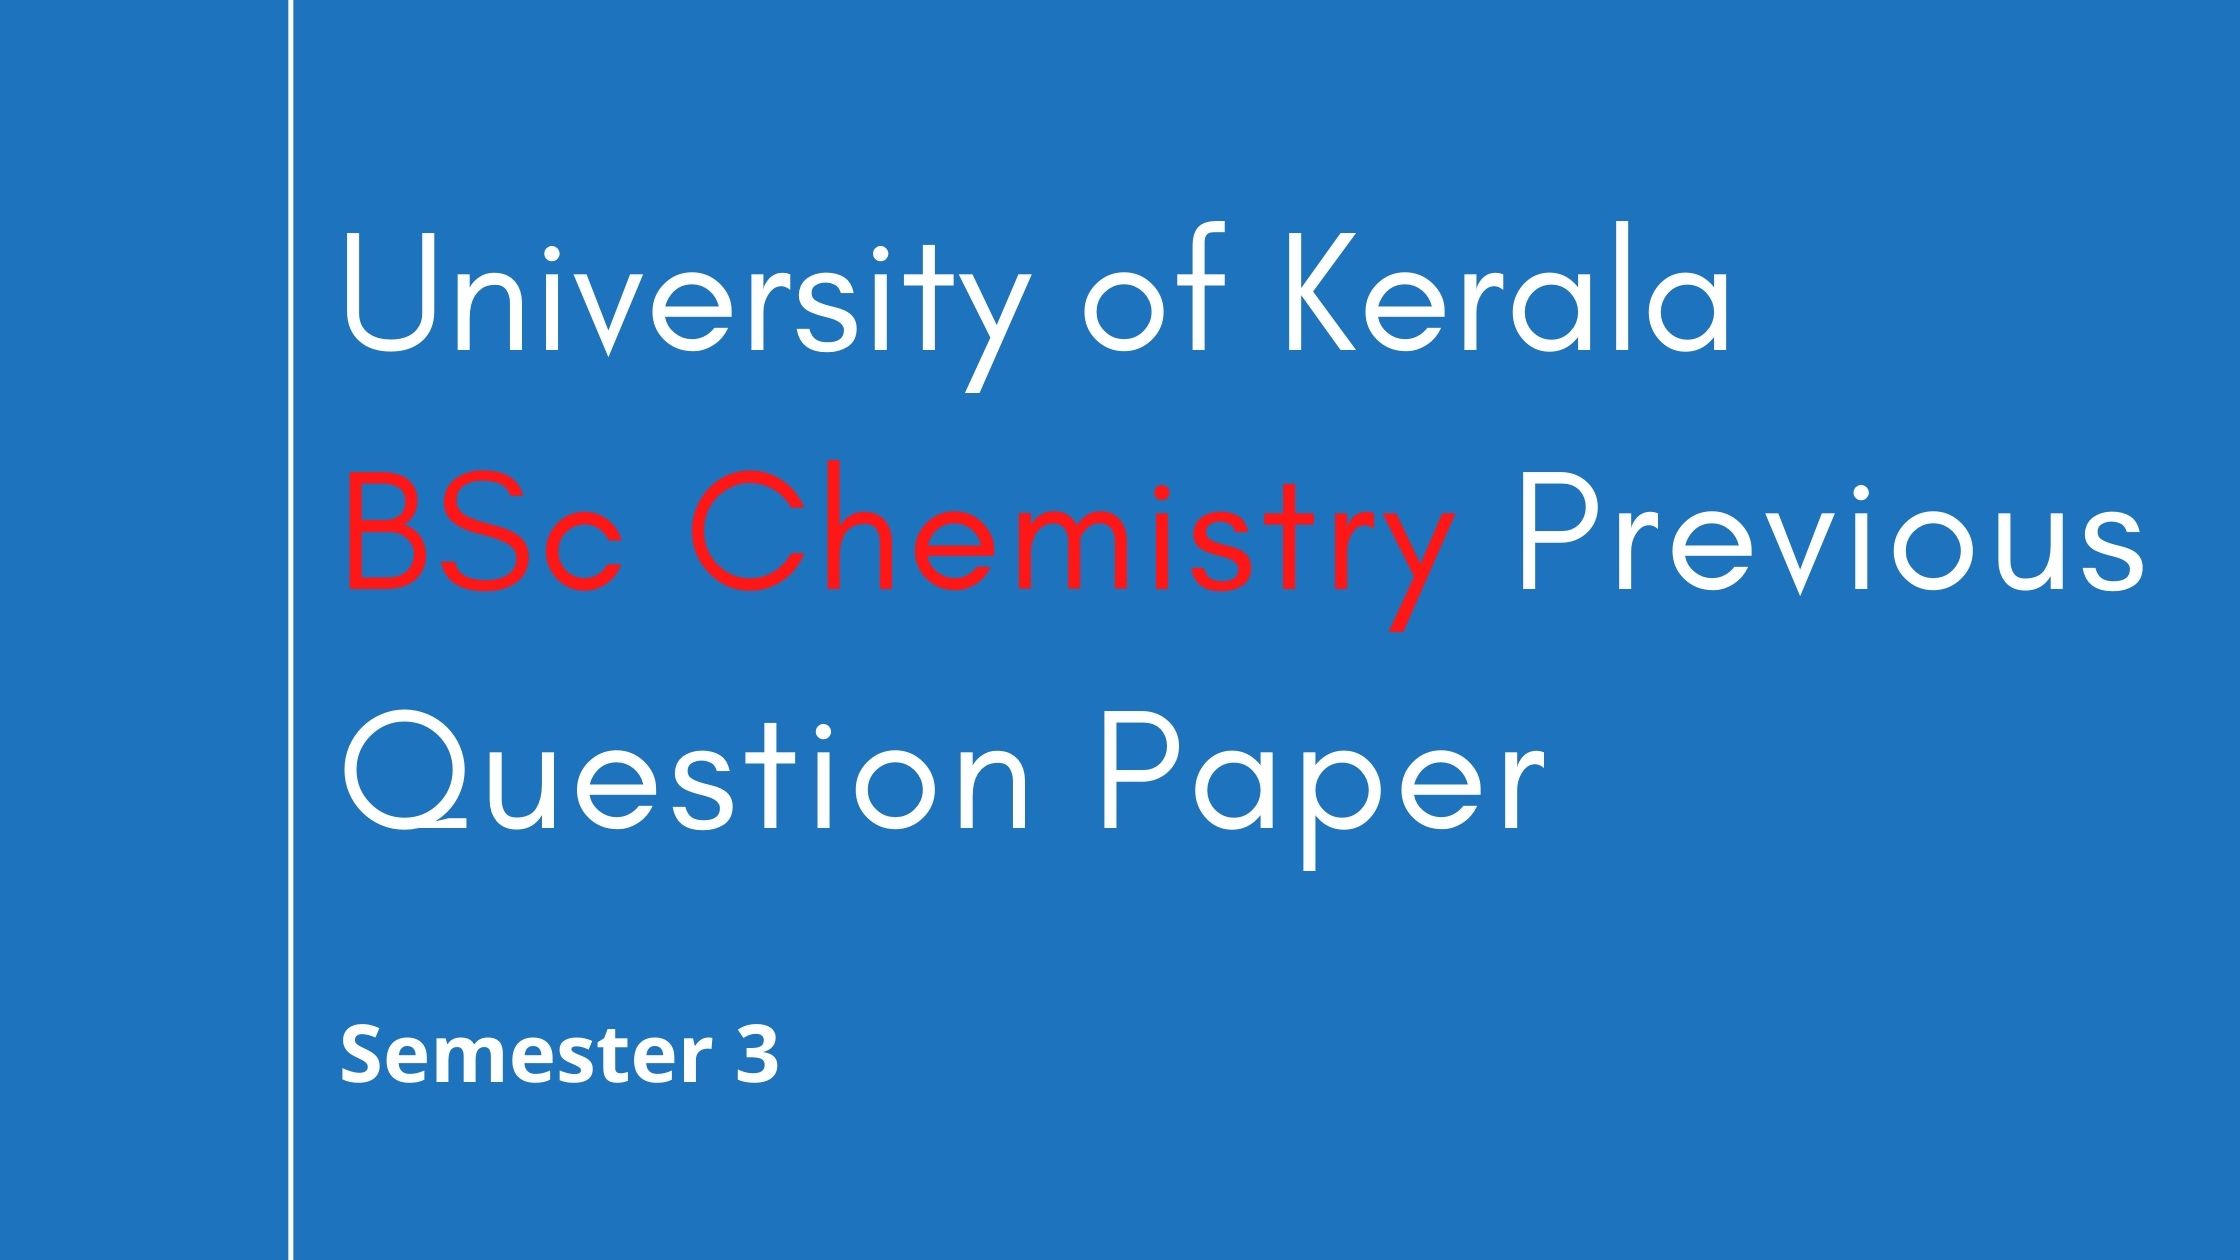 BSc Chemistry Second Semester Previous Year Question Papers of Kerala University